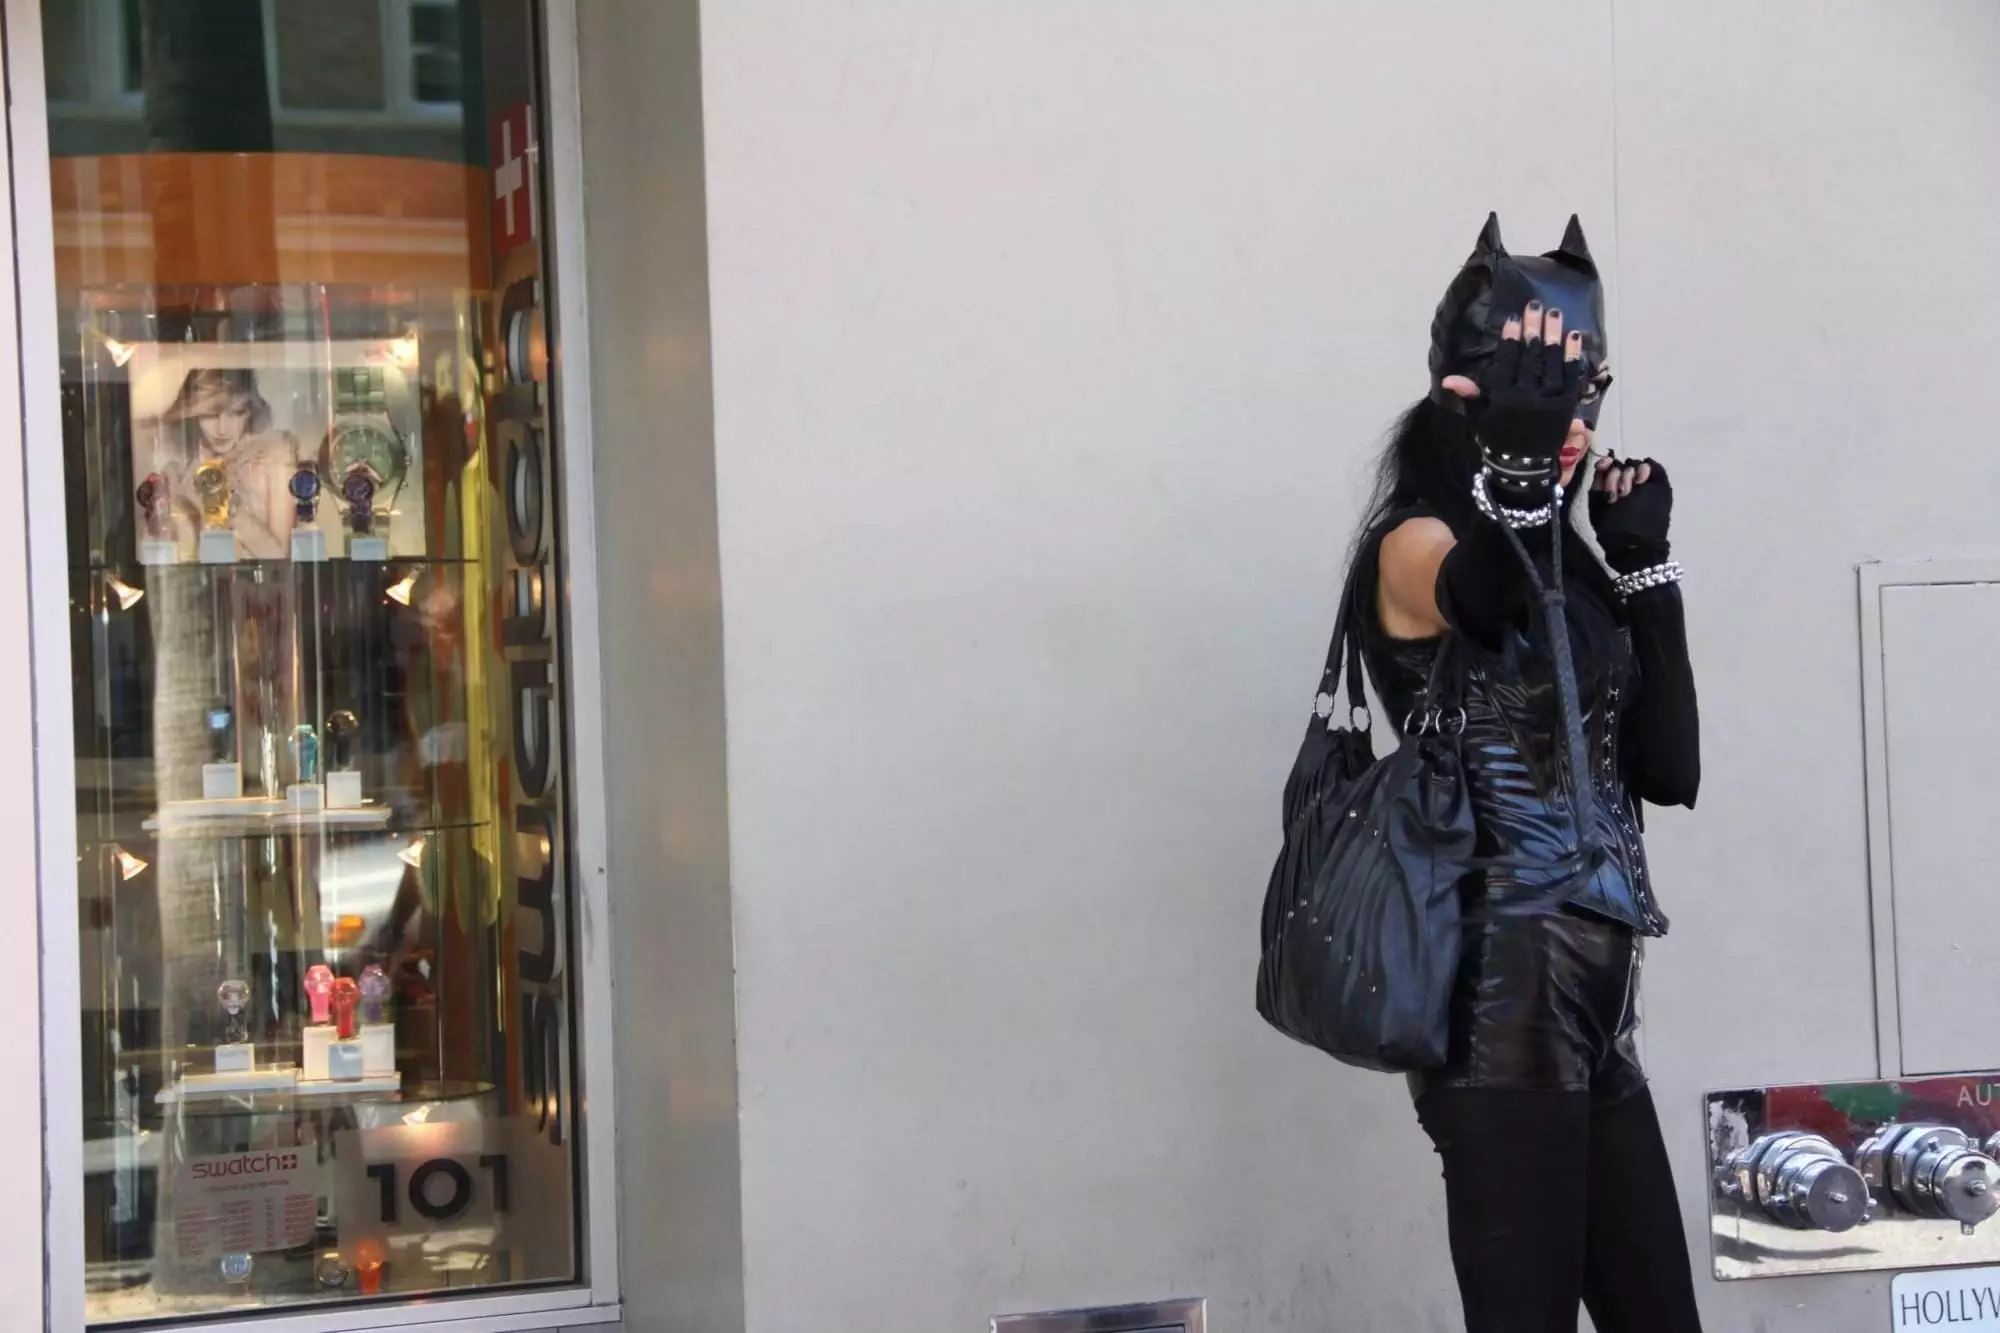 A woman wearing an all-black cat costume and showing her nails for Toronto